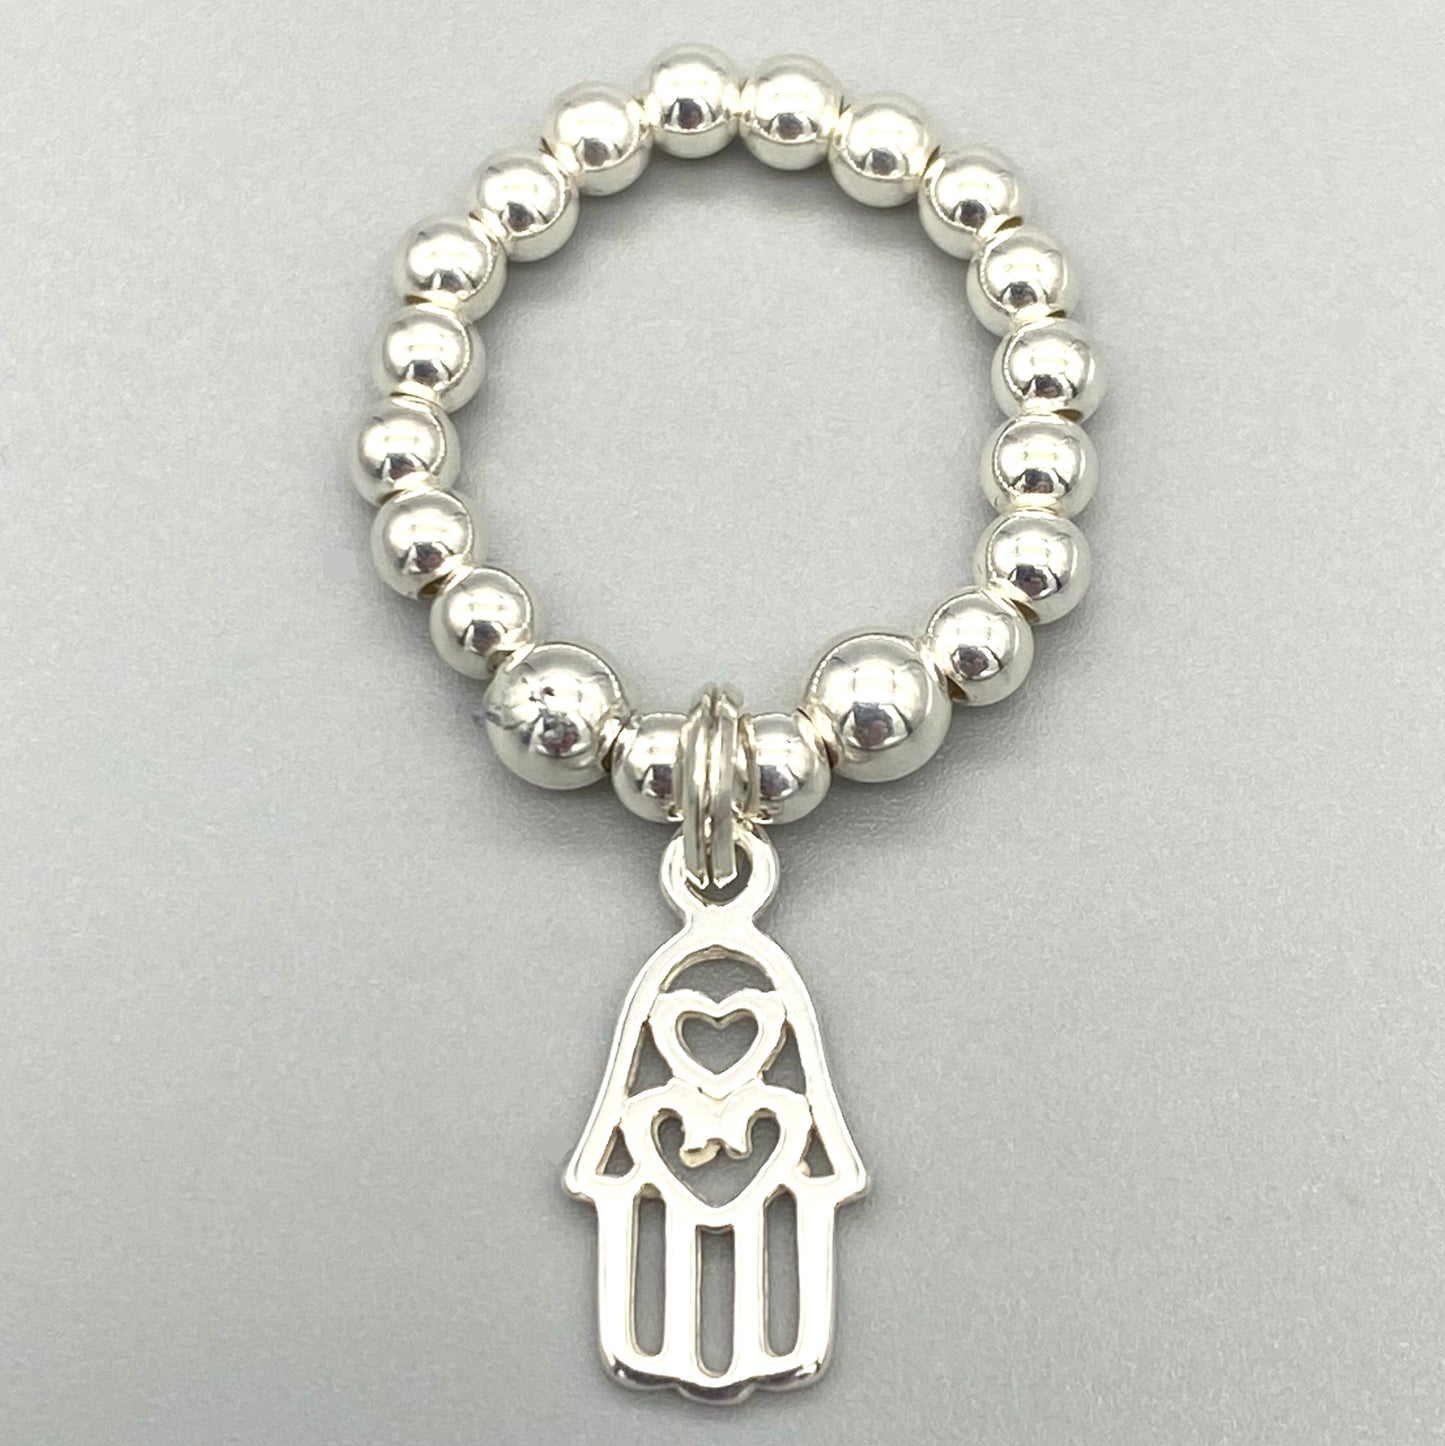 Hamsa hand charm sterling silver women's stacking ring by My Silver Wish